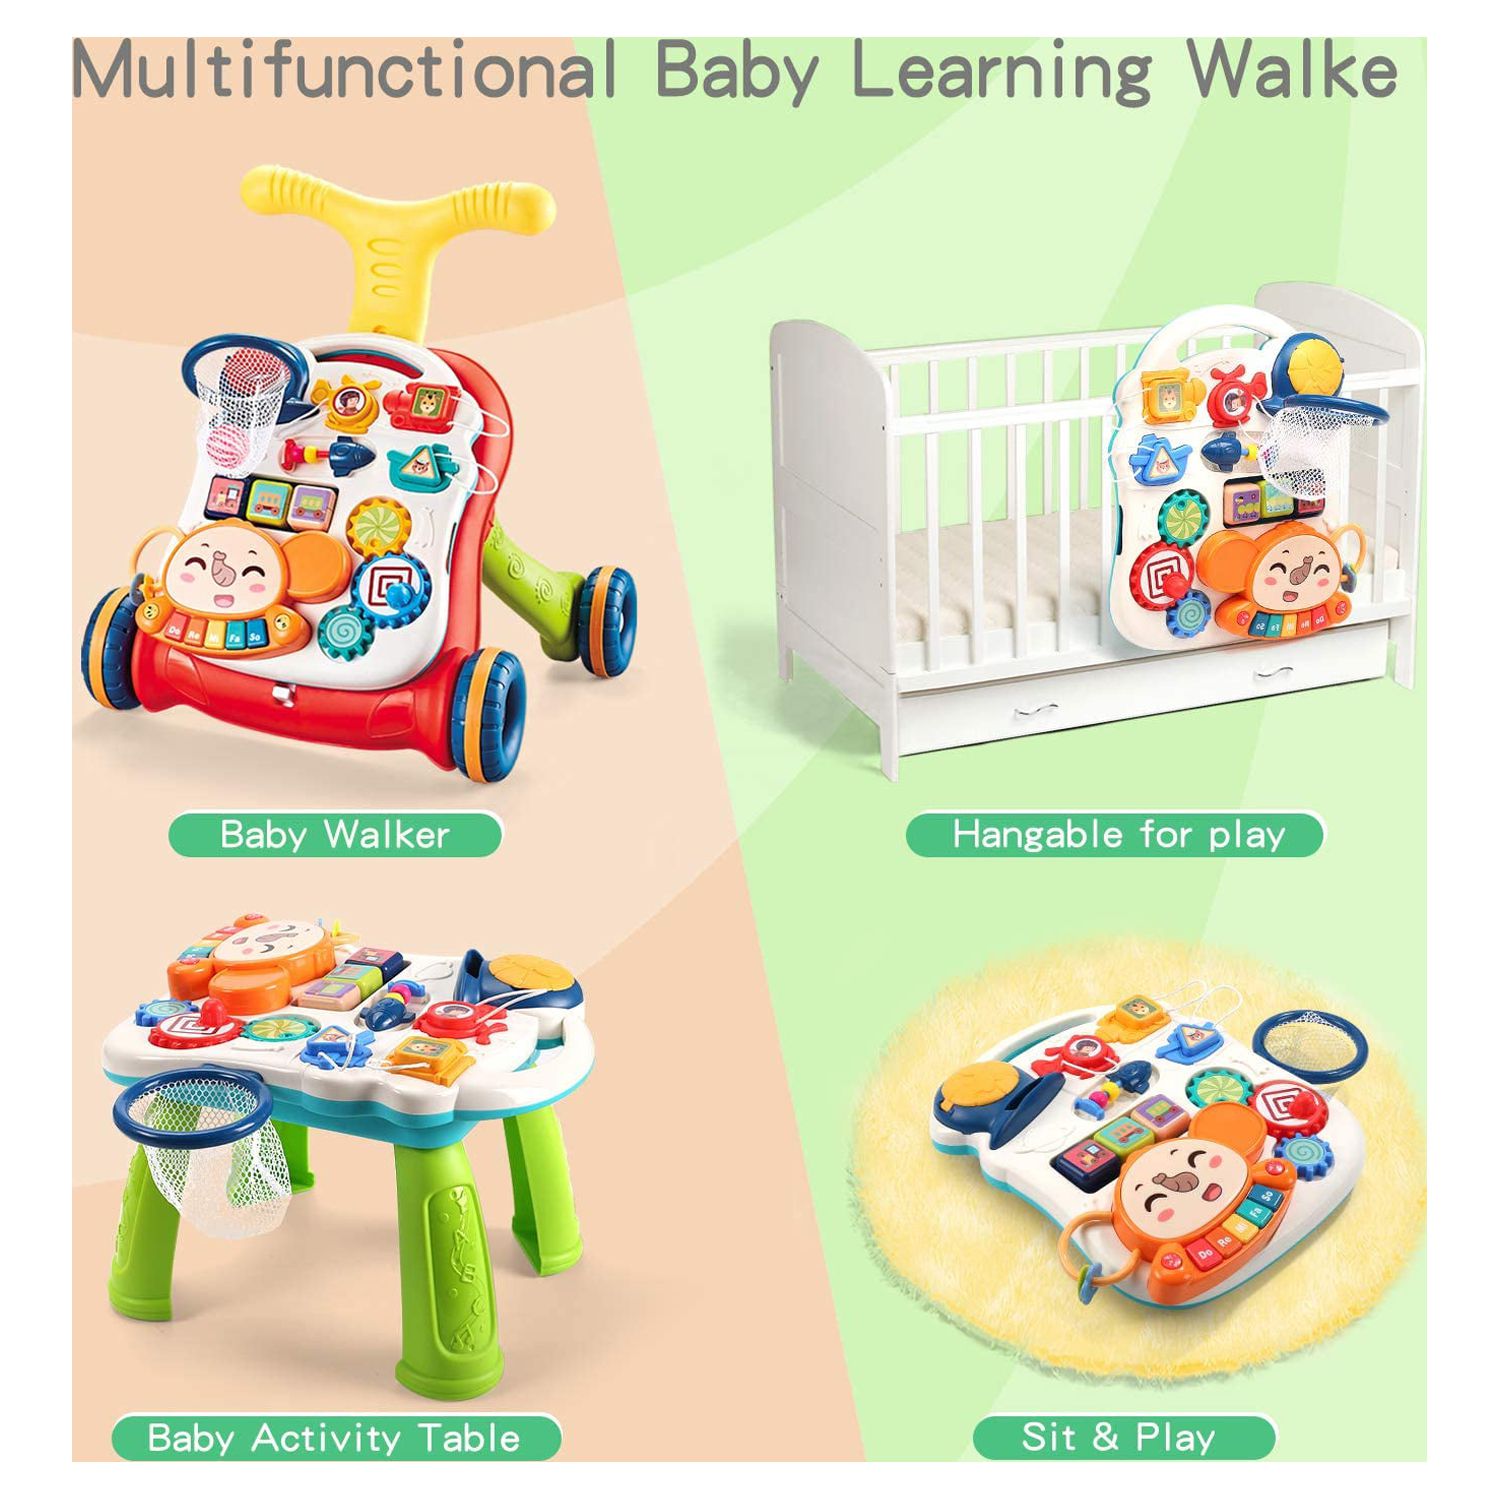 JoyStone 2-in-1 Baby Walker Baby Sit-to-Stand Learning Walker Kids Educational Toy Gift for Toddlers Infant Boys Girls - image 4 of 11